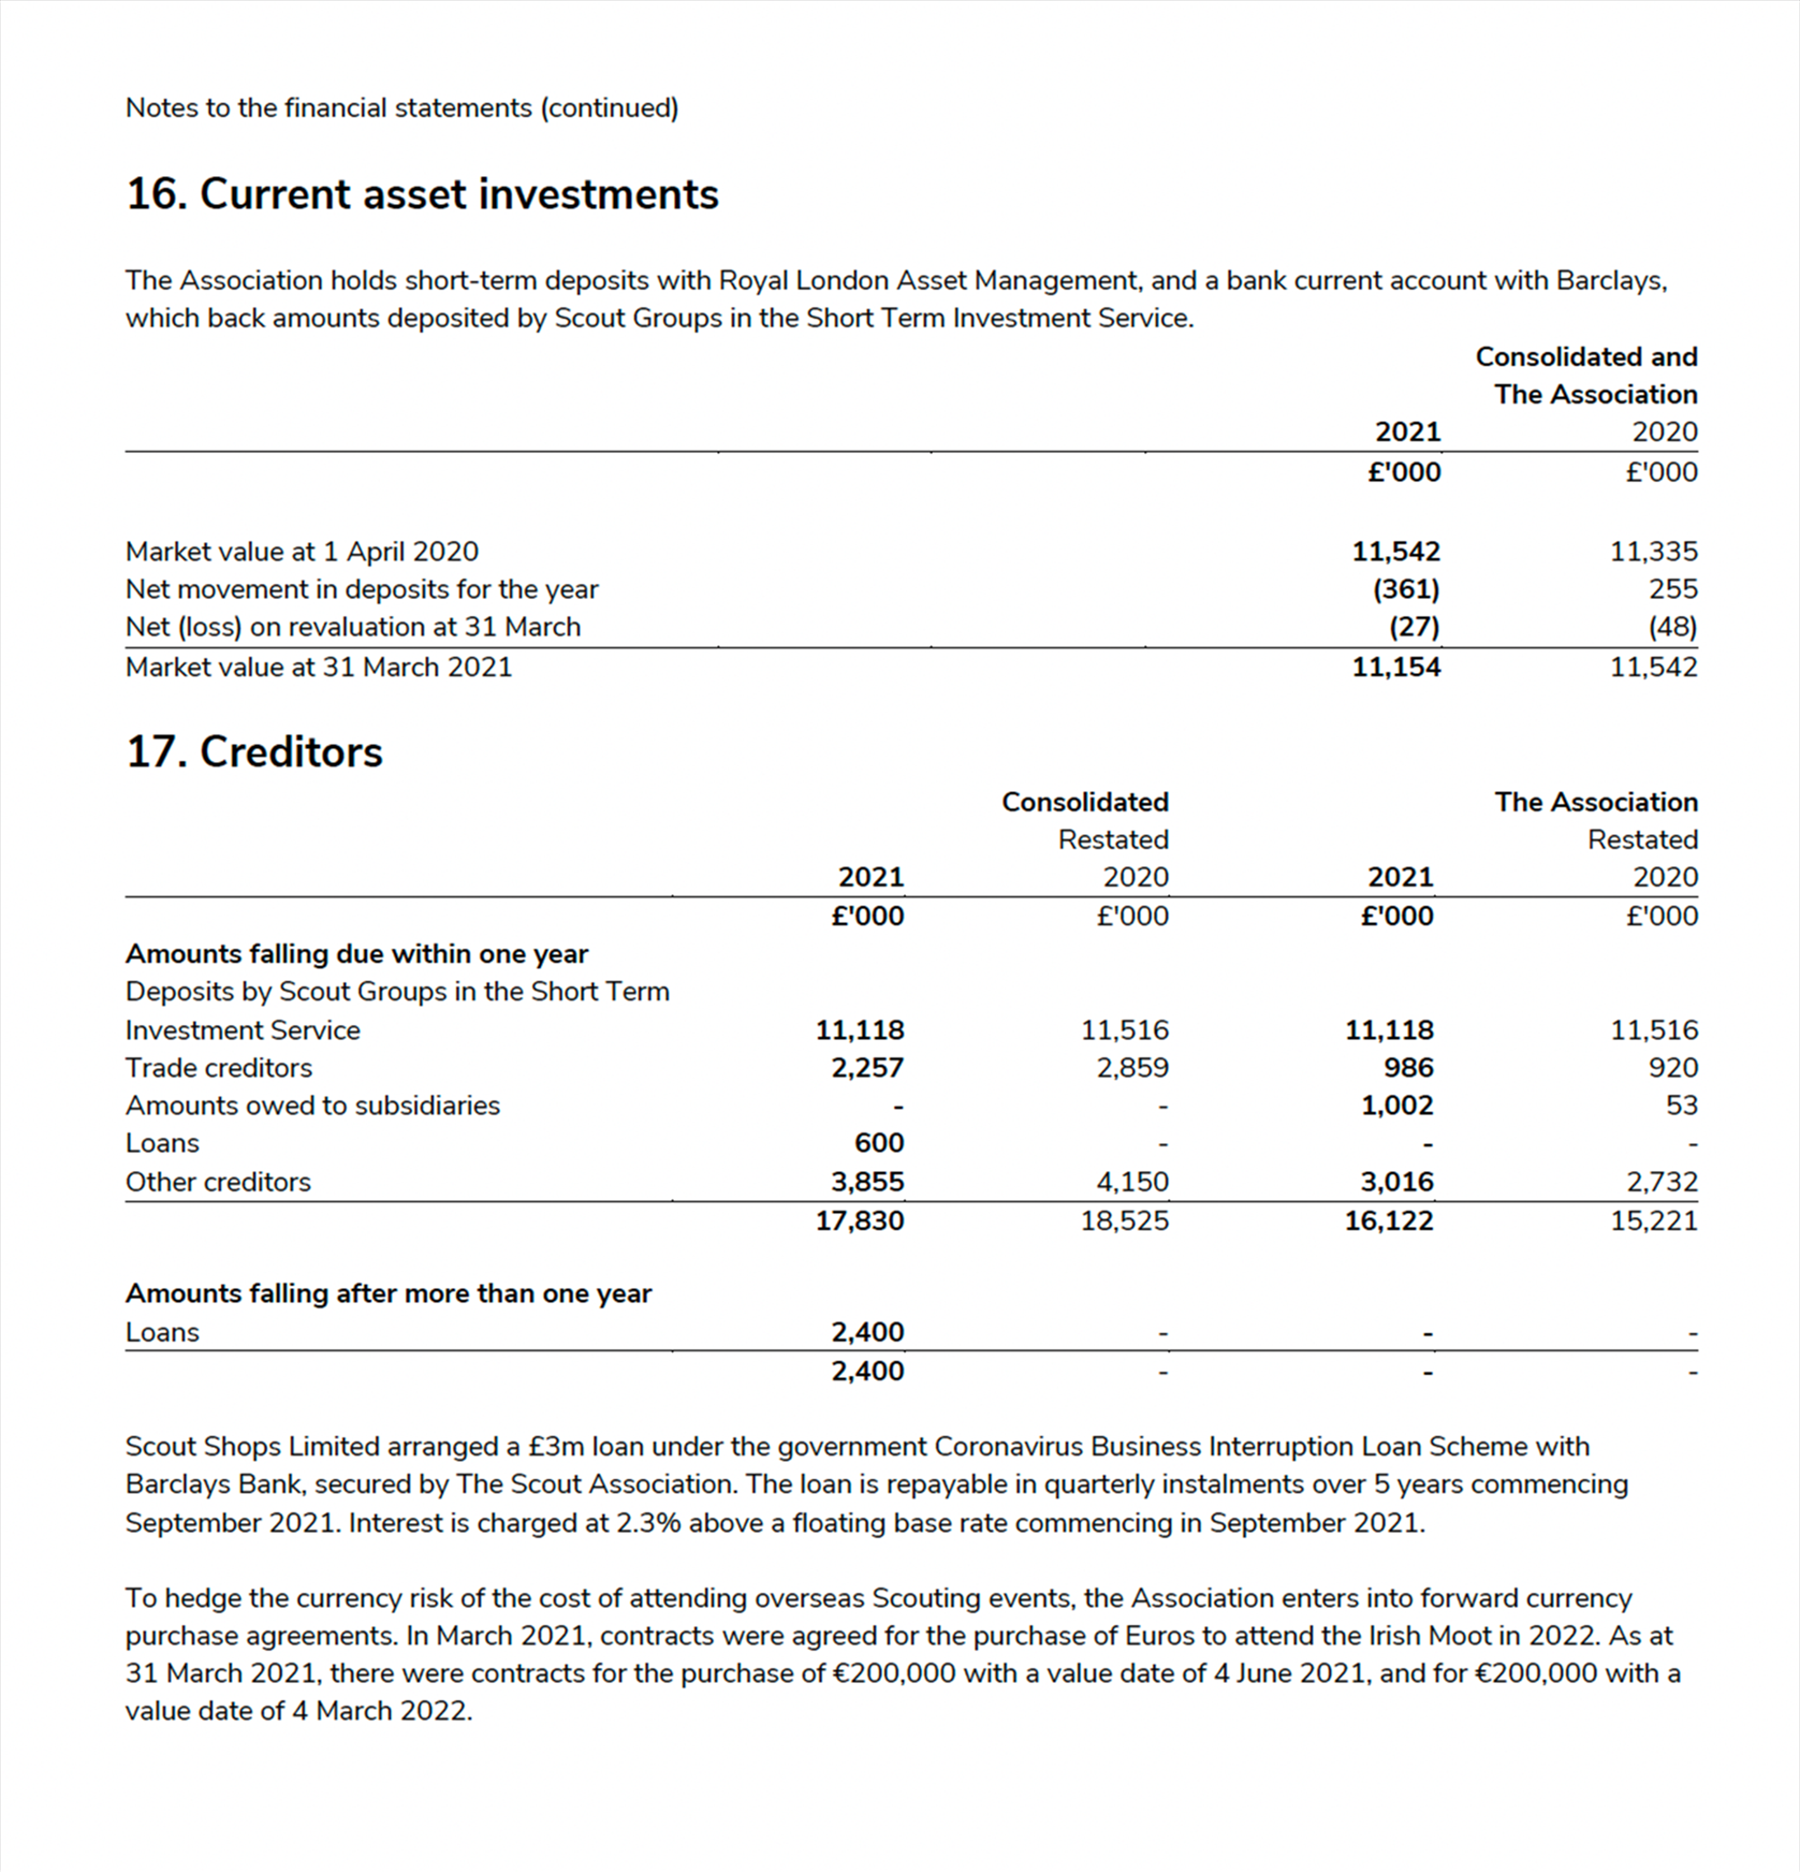 Current asset investments and creditors